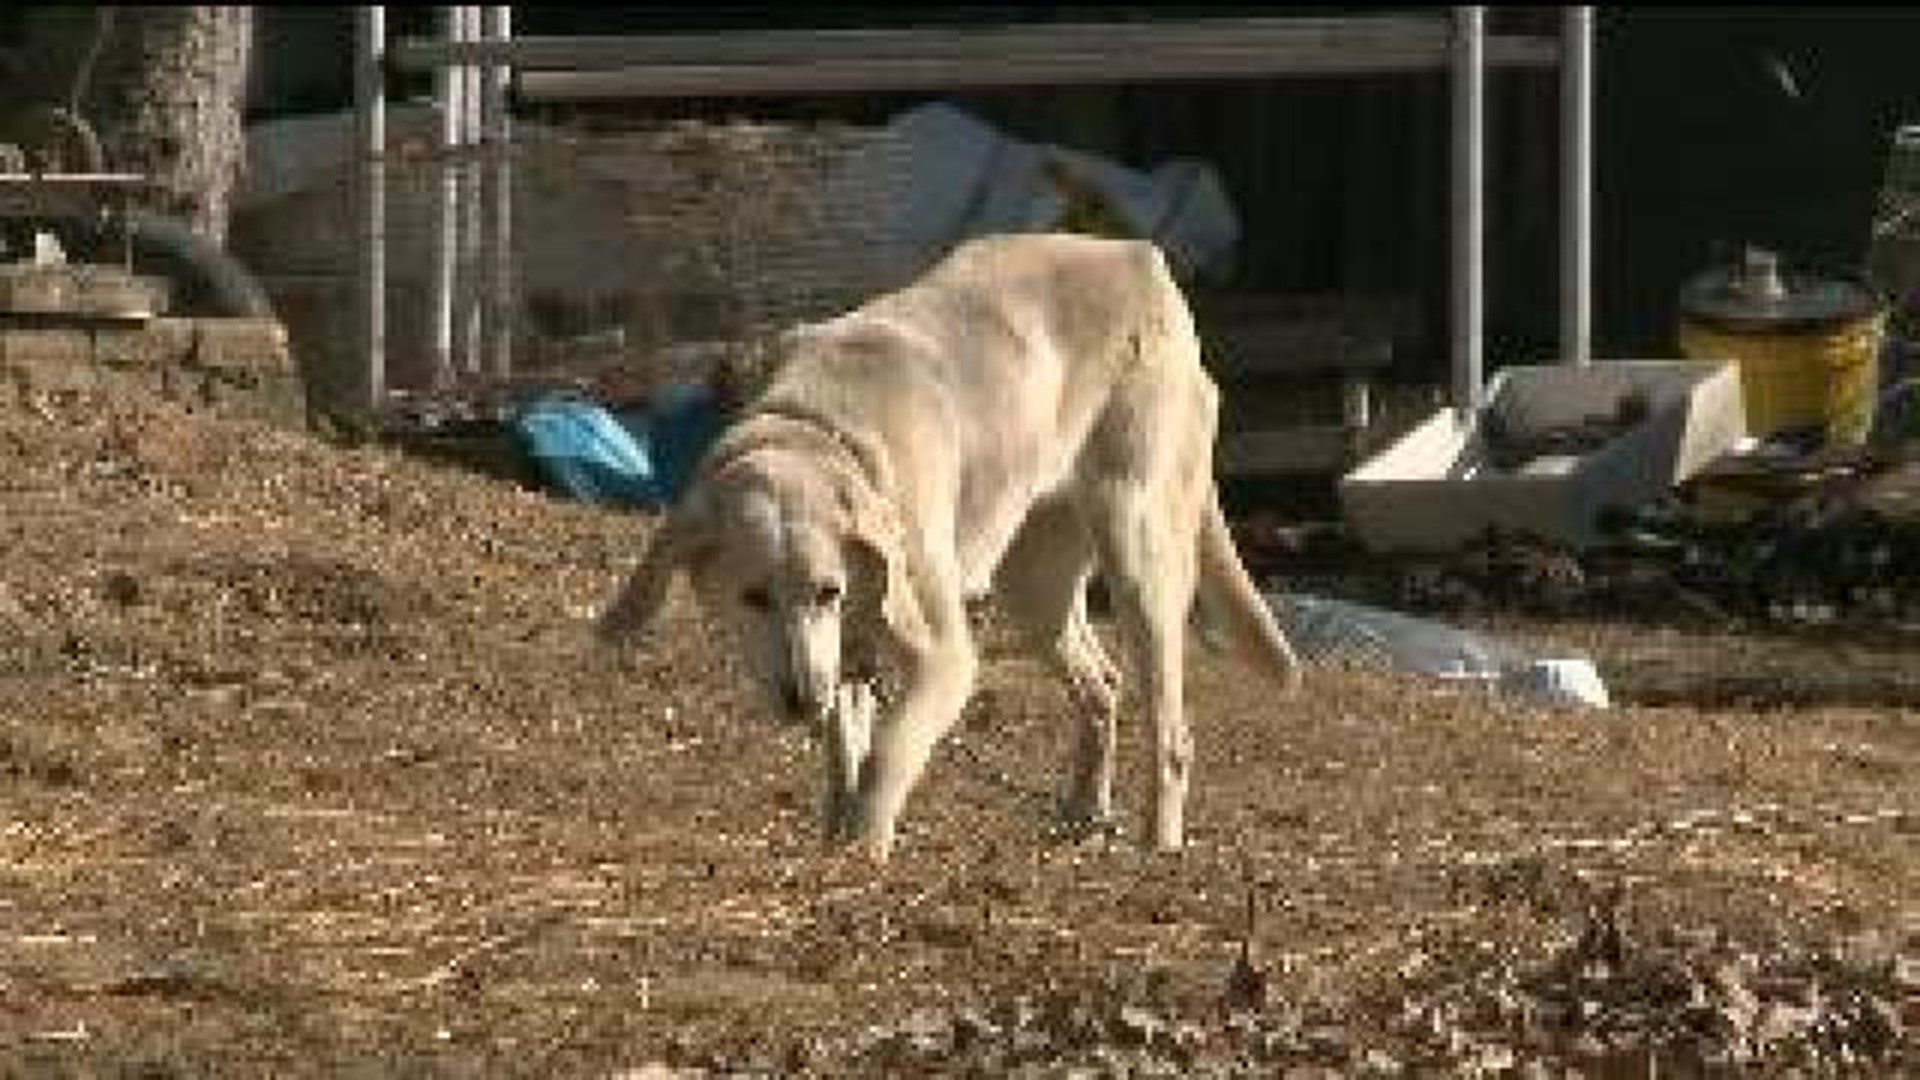 Missing Hunting Dogs Returned Home